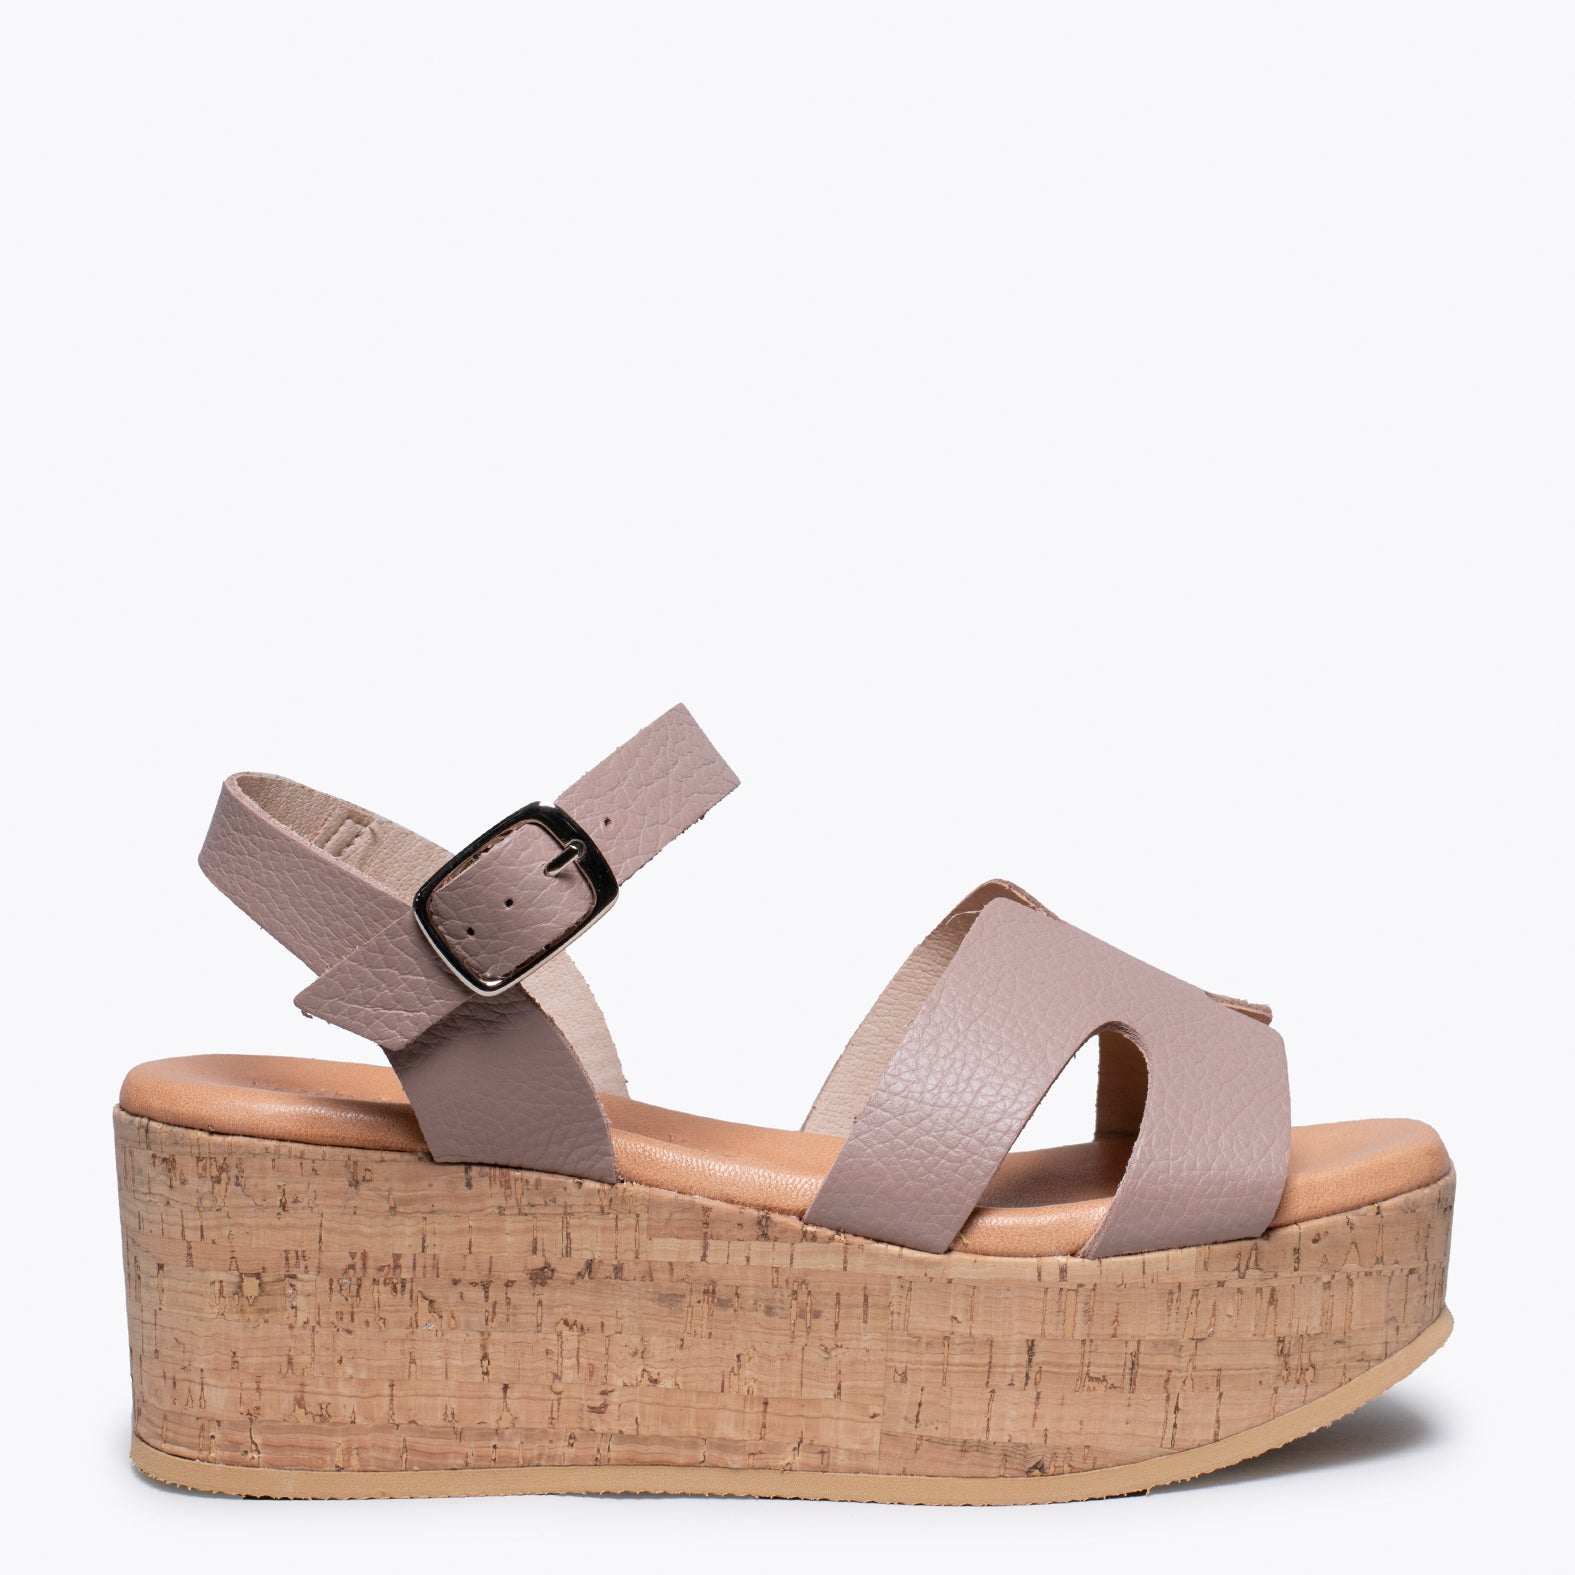 HACHE – PINK SANDAL WITH CORK WEDGE